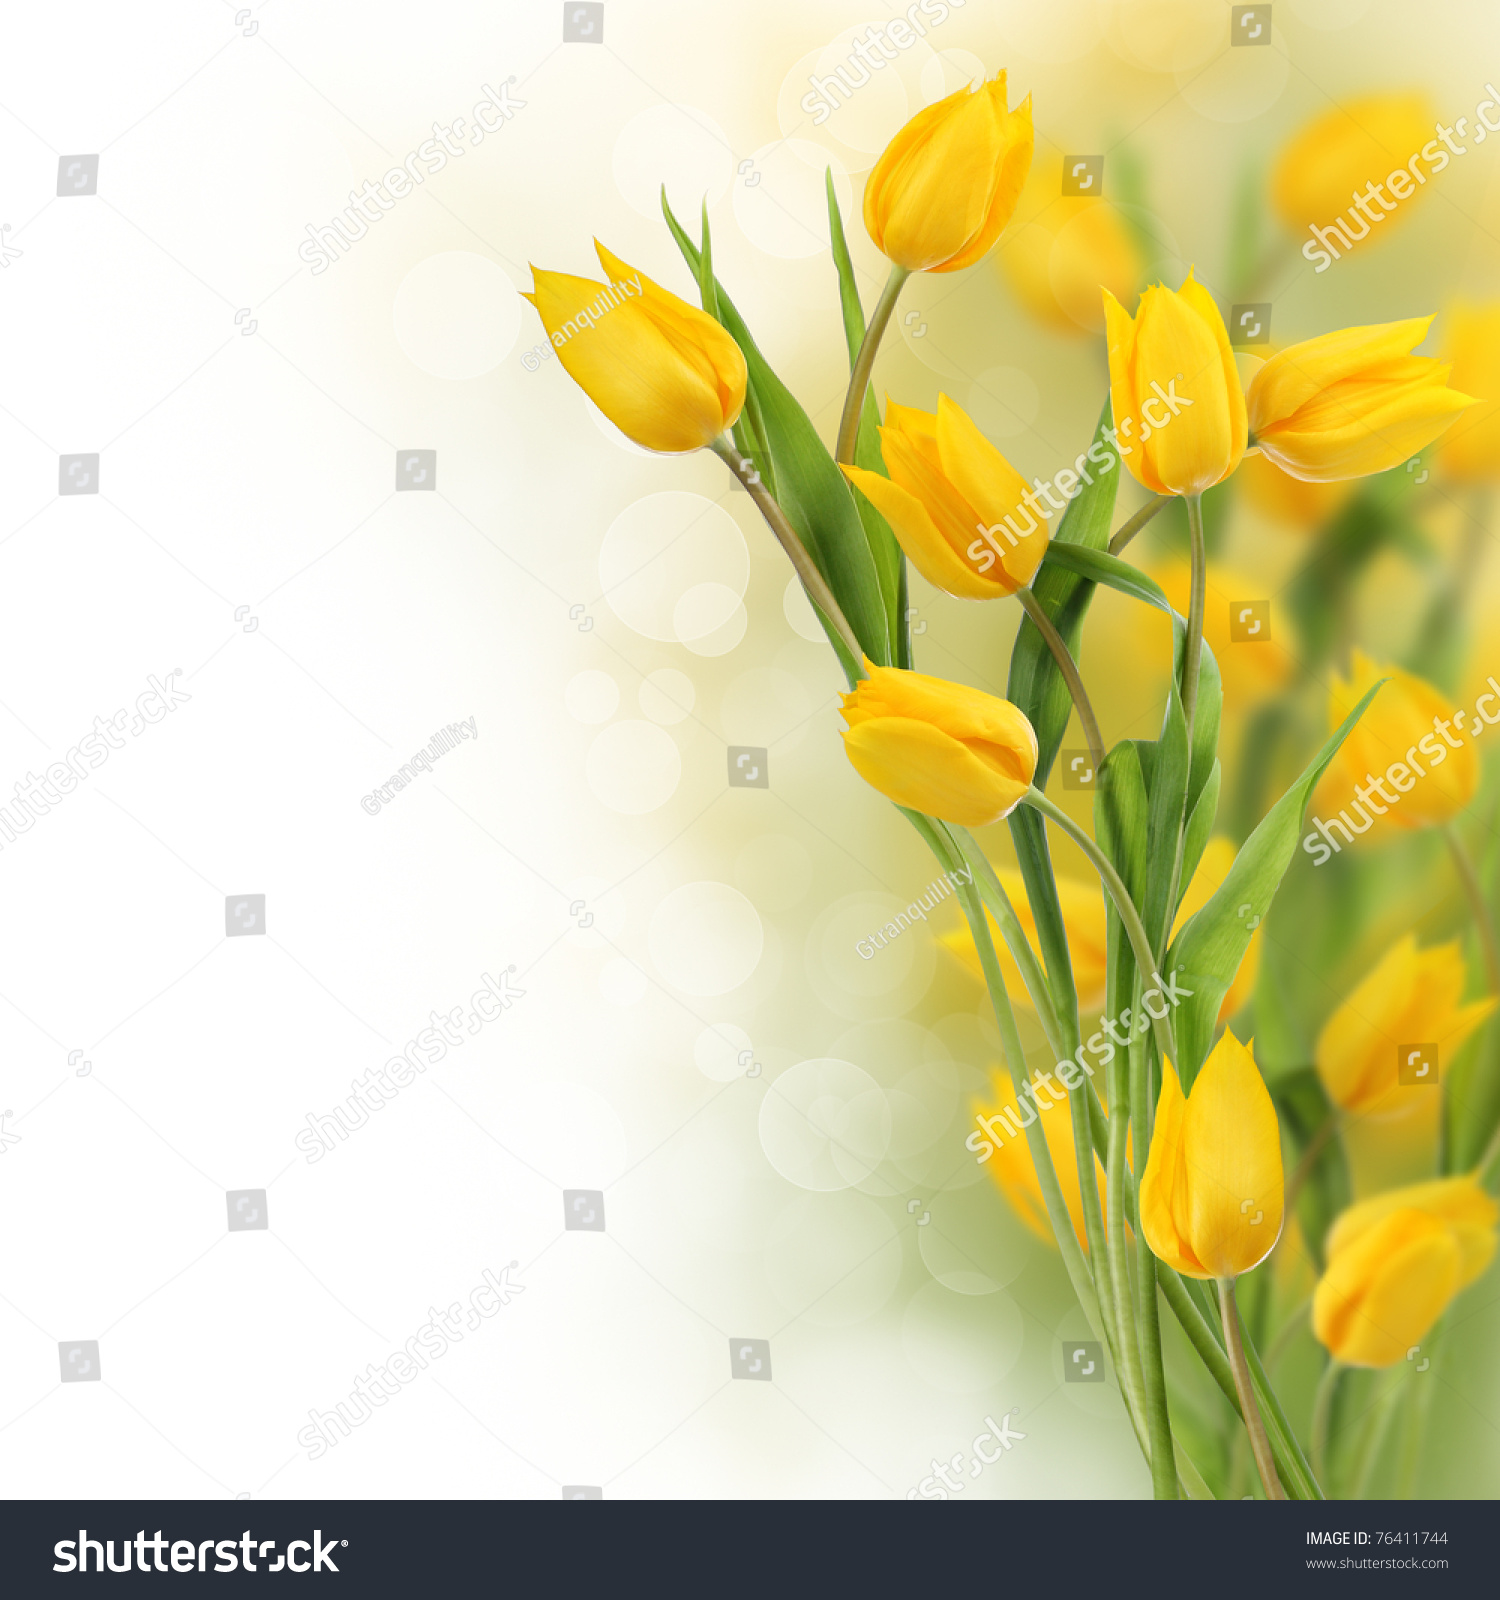 Yellow Tulip Flowers Copy Space Stock Photo (Royalty Free) 76411744 ...